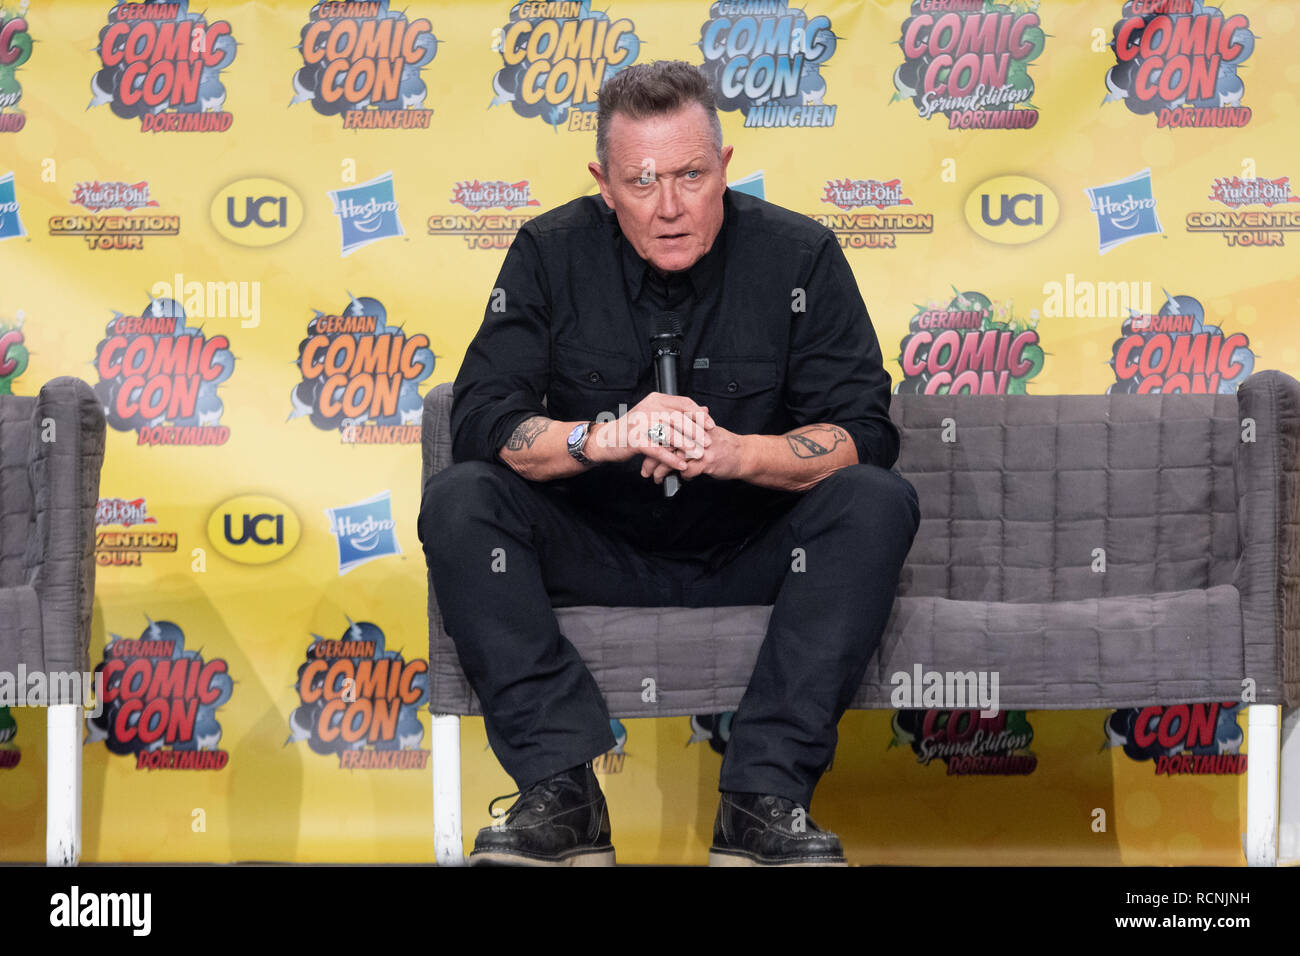 DORTMUND, GERMANY - December 1st 2018: Robert Patrick (*1958, actor, The X-Files, Terminator 2) at German Comic Con Dortmund, a two day fan convention Stock Photo